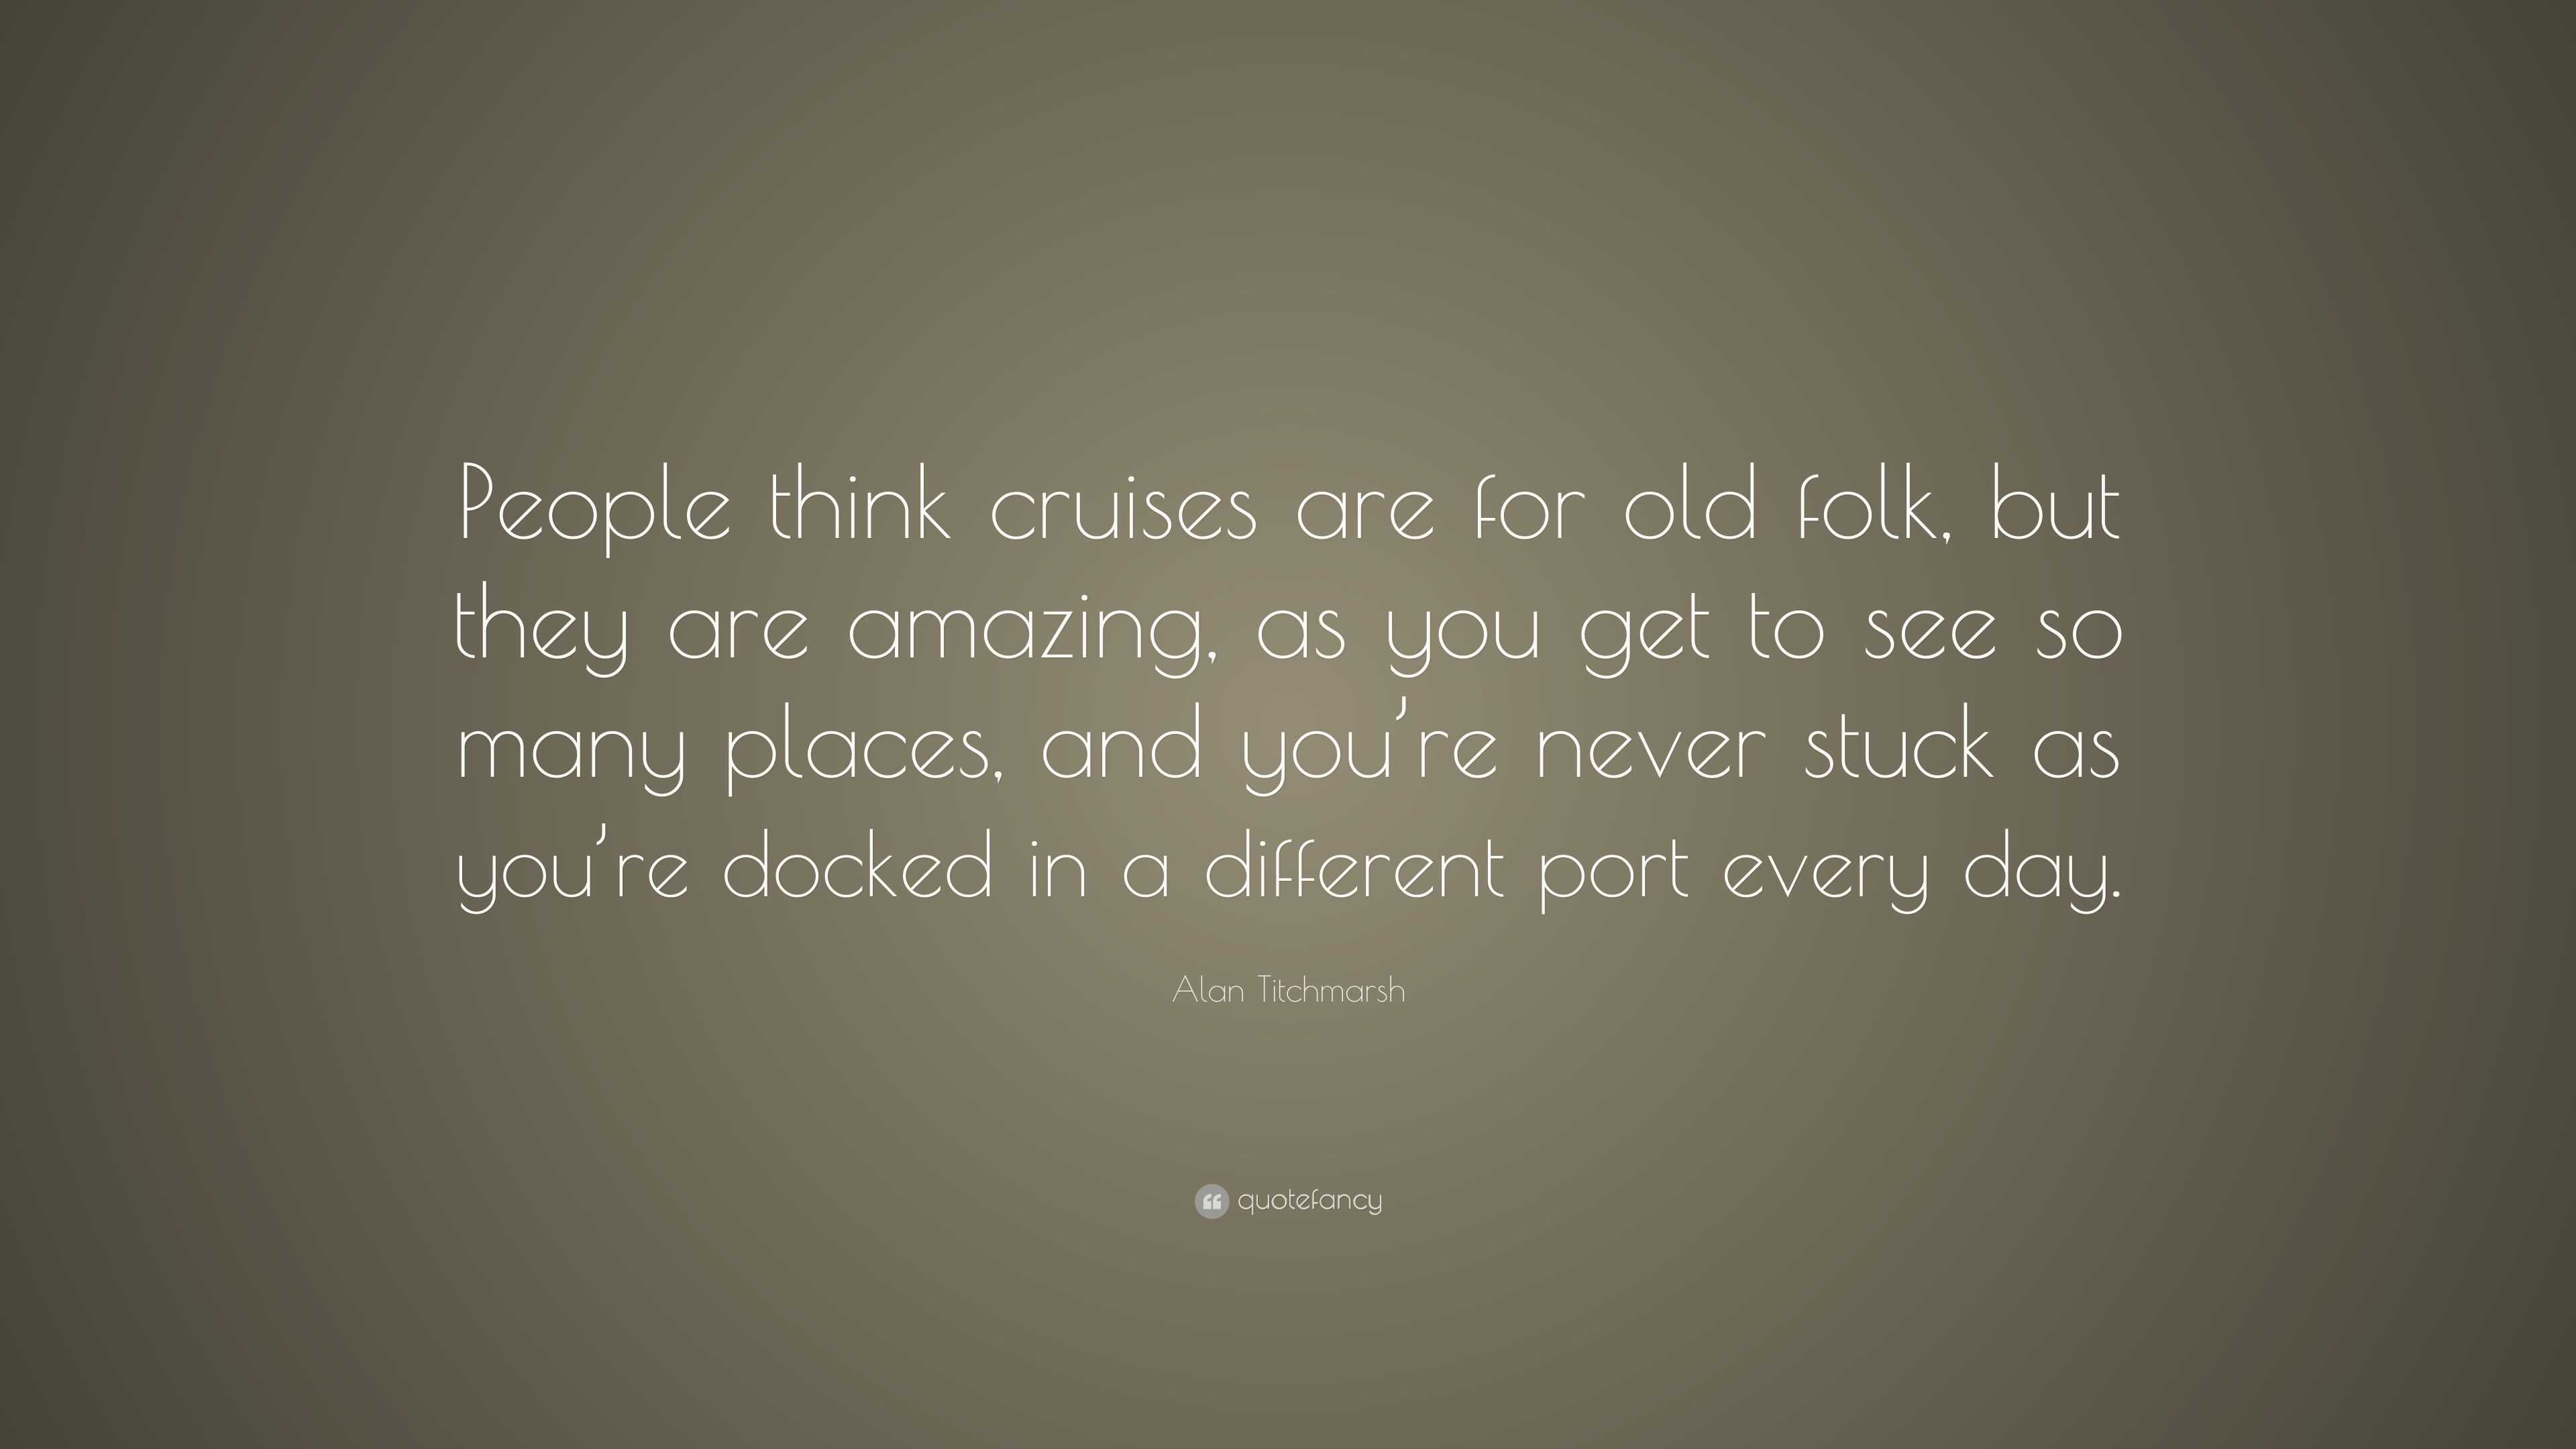 Alan Titchmarsh Quote: “People think cruises are for old folk, but they ...